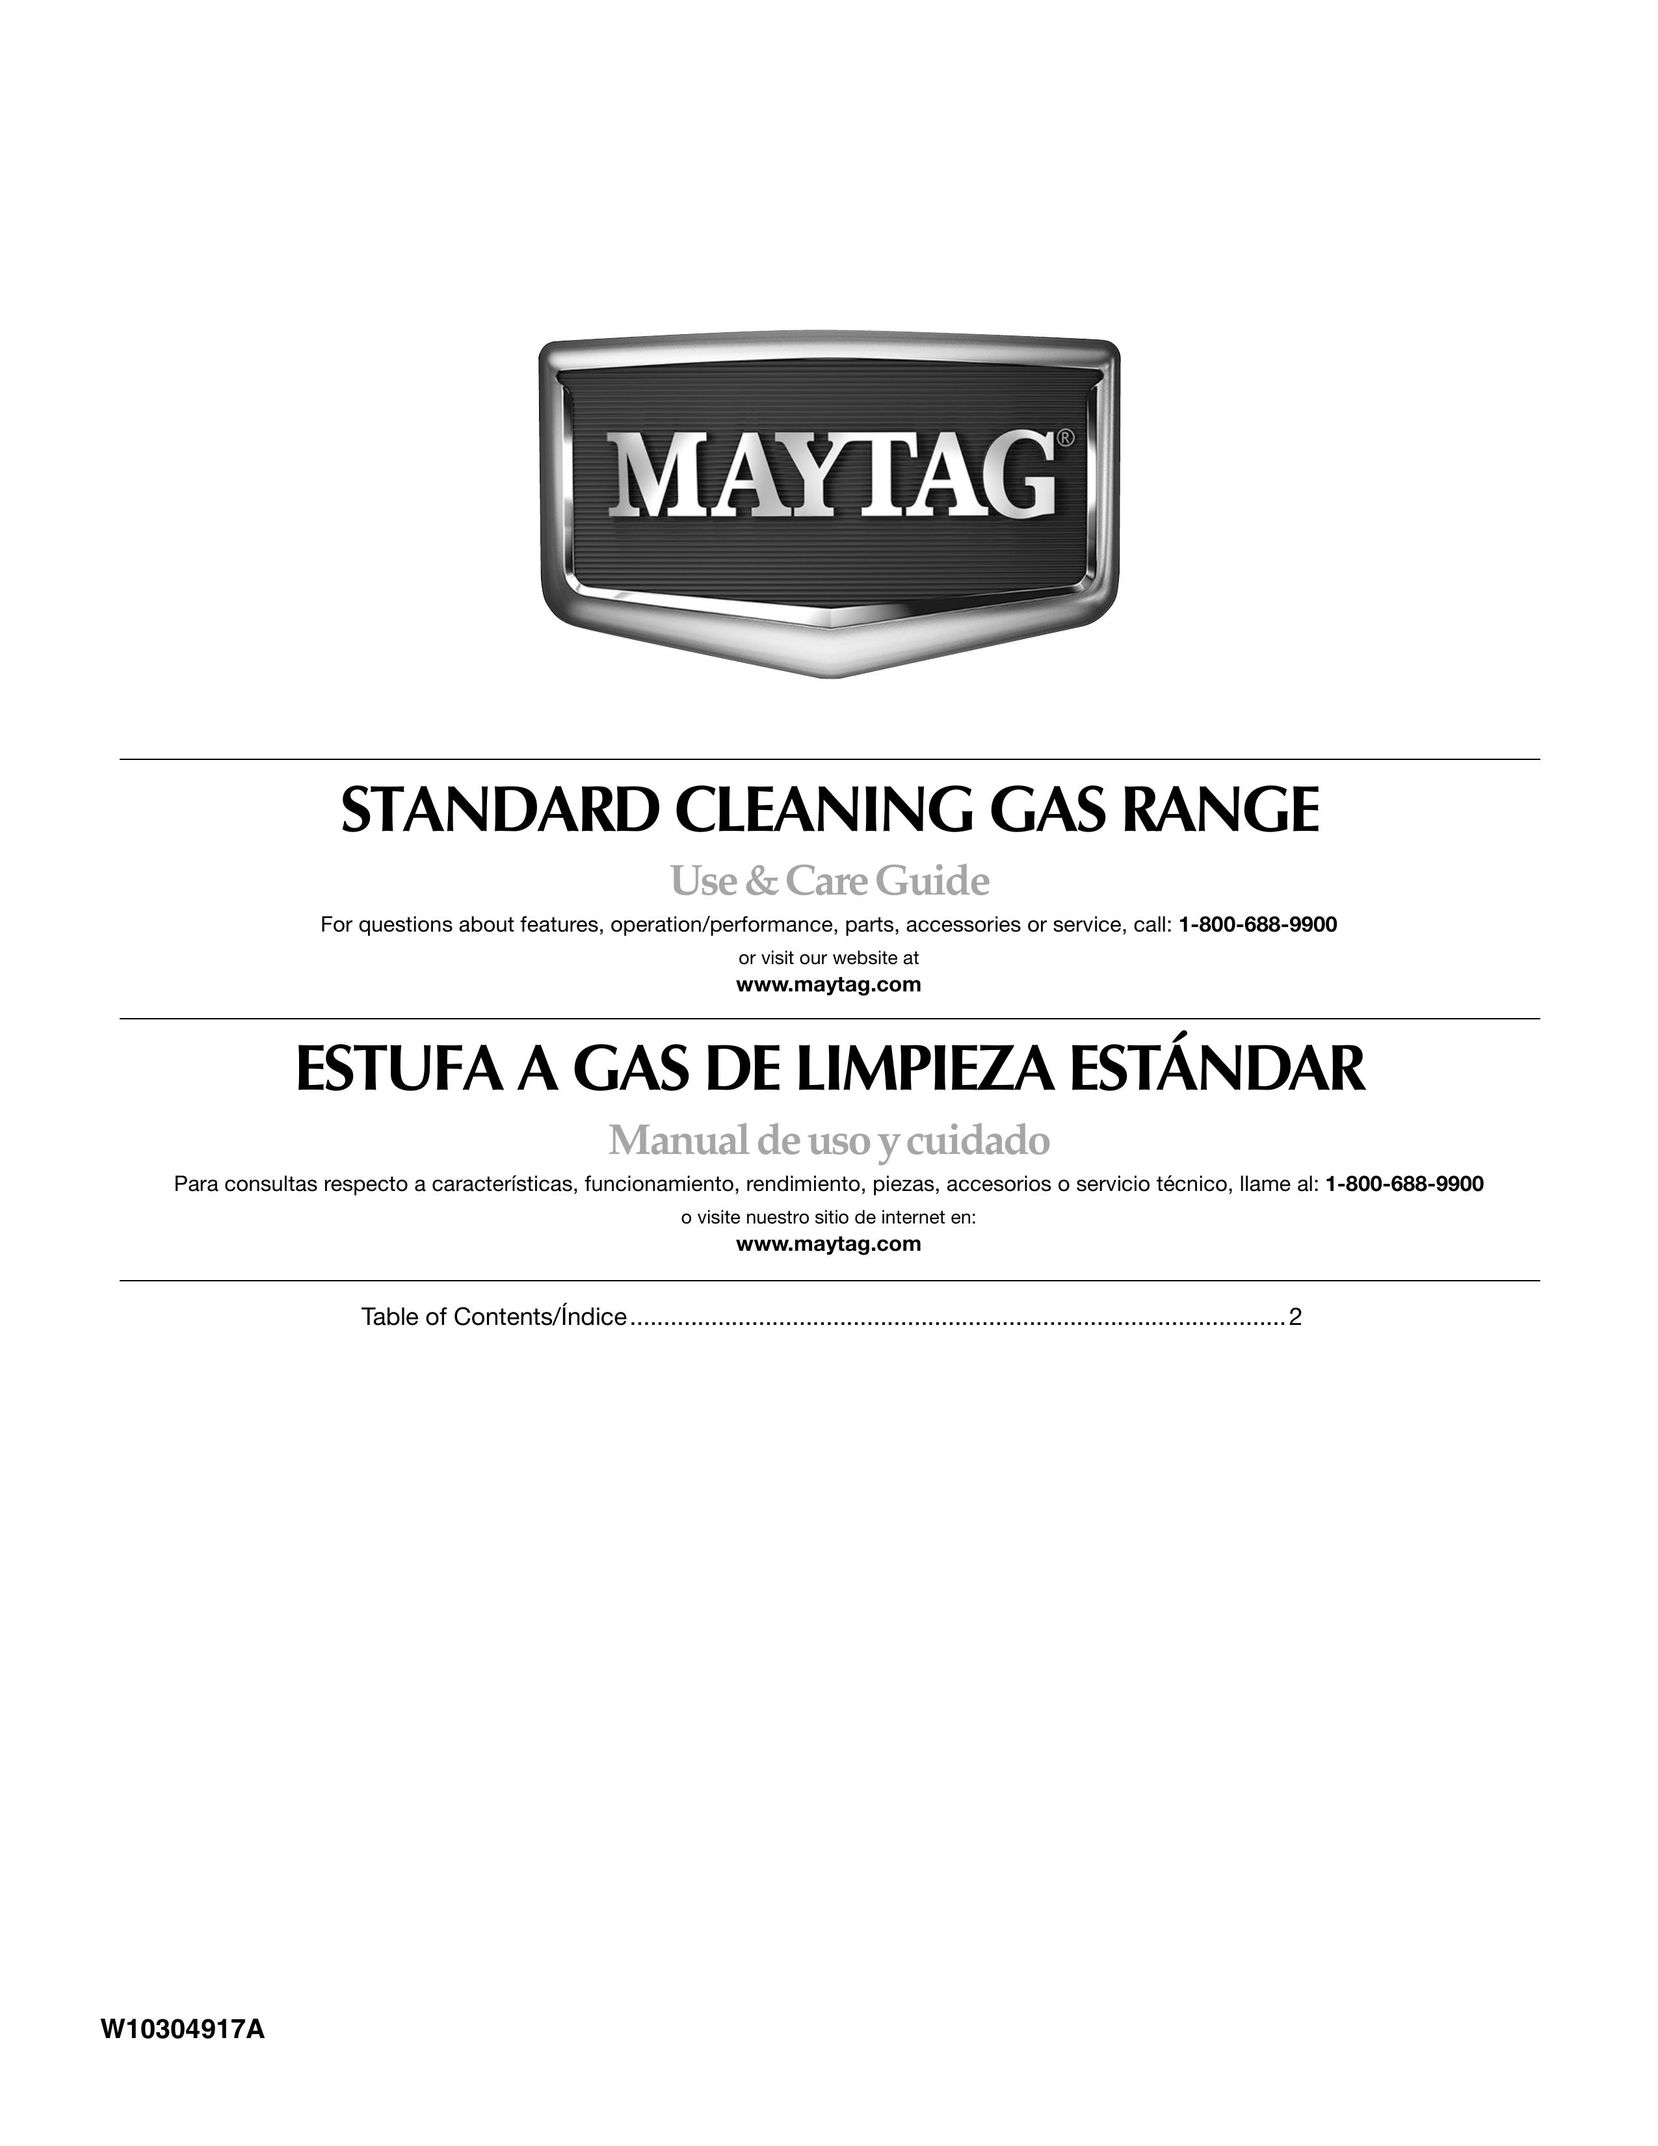 Maytag W10304917A Oven User Manual